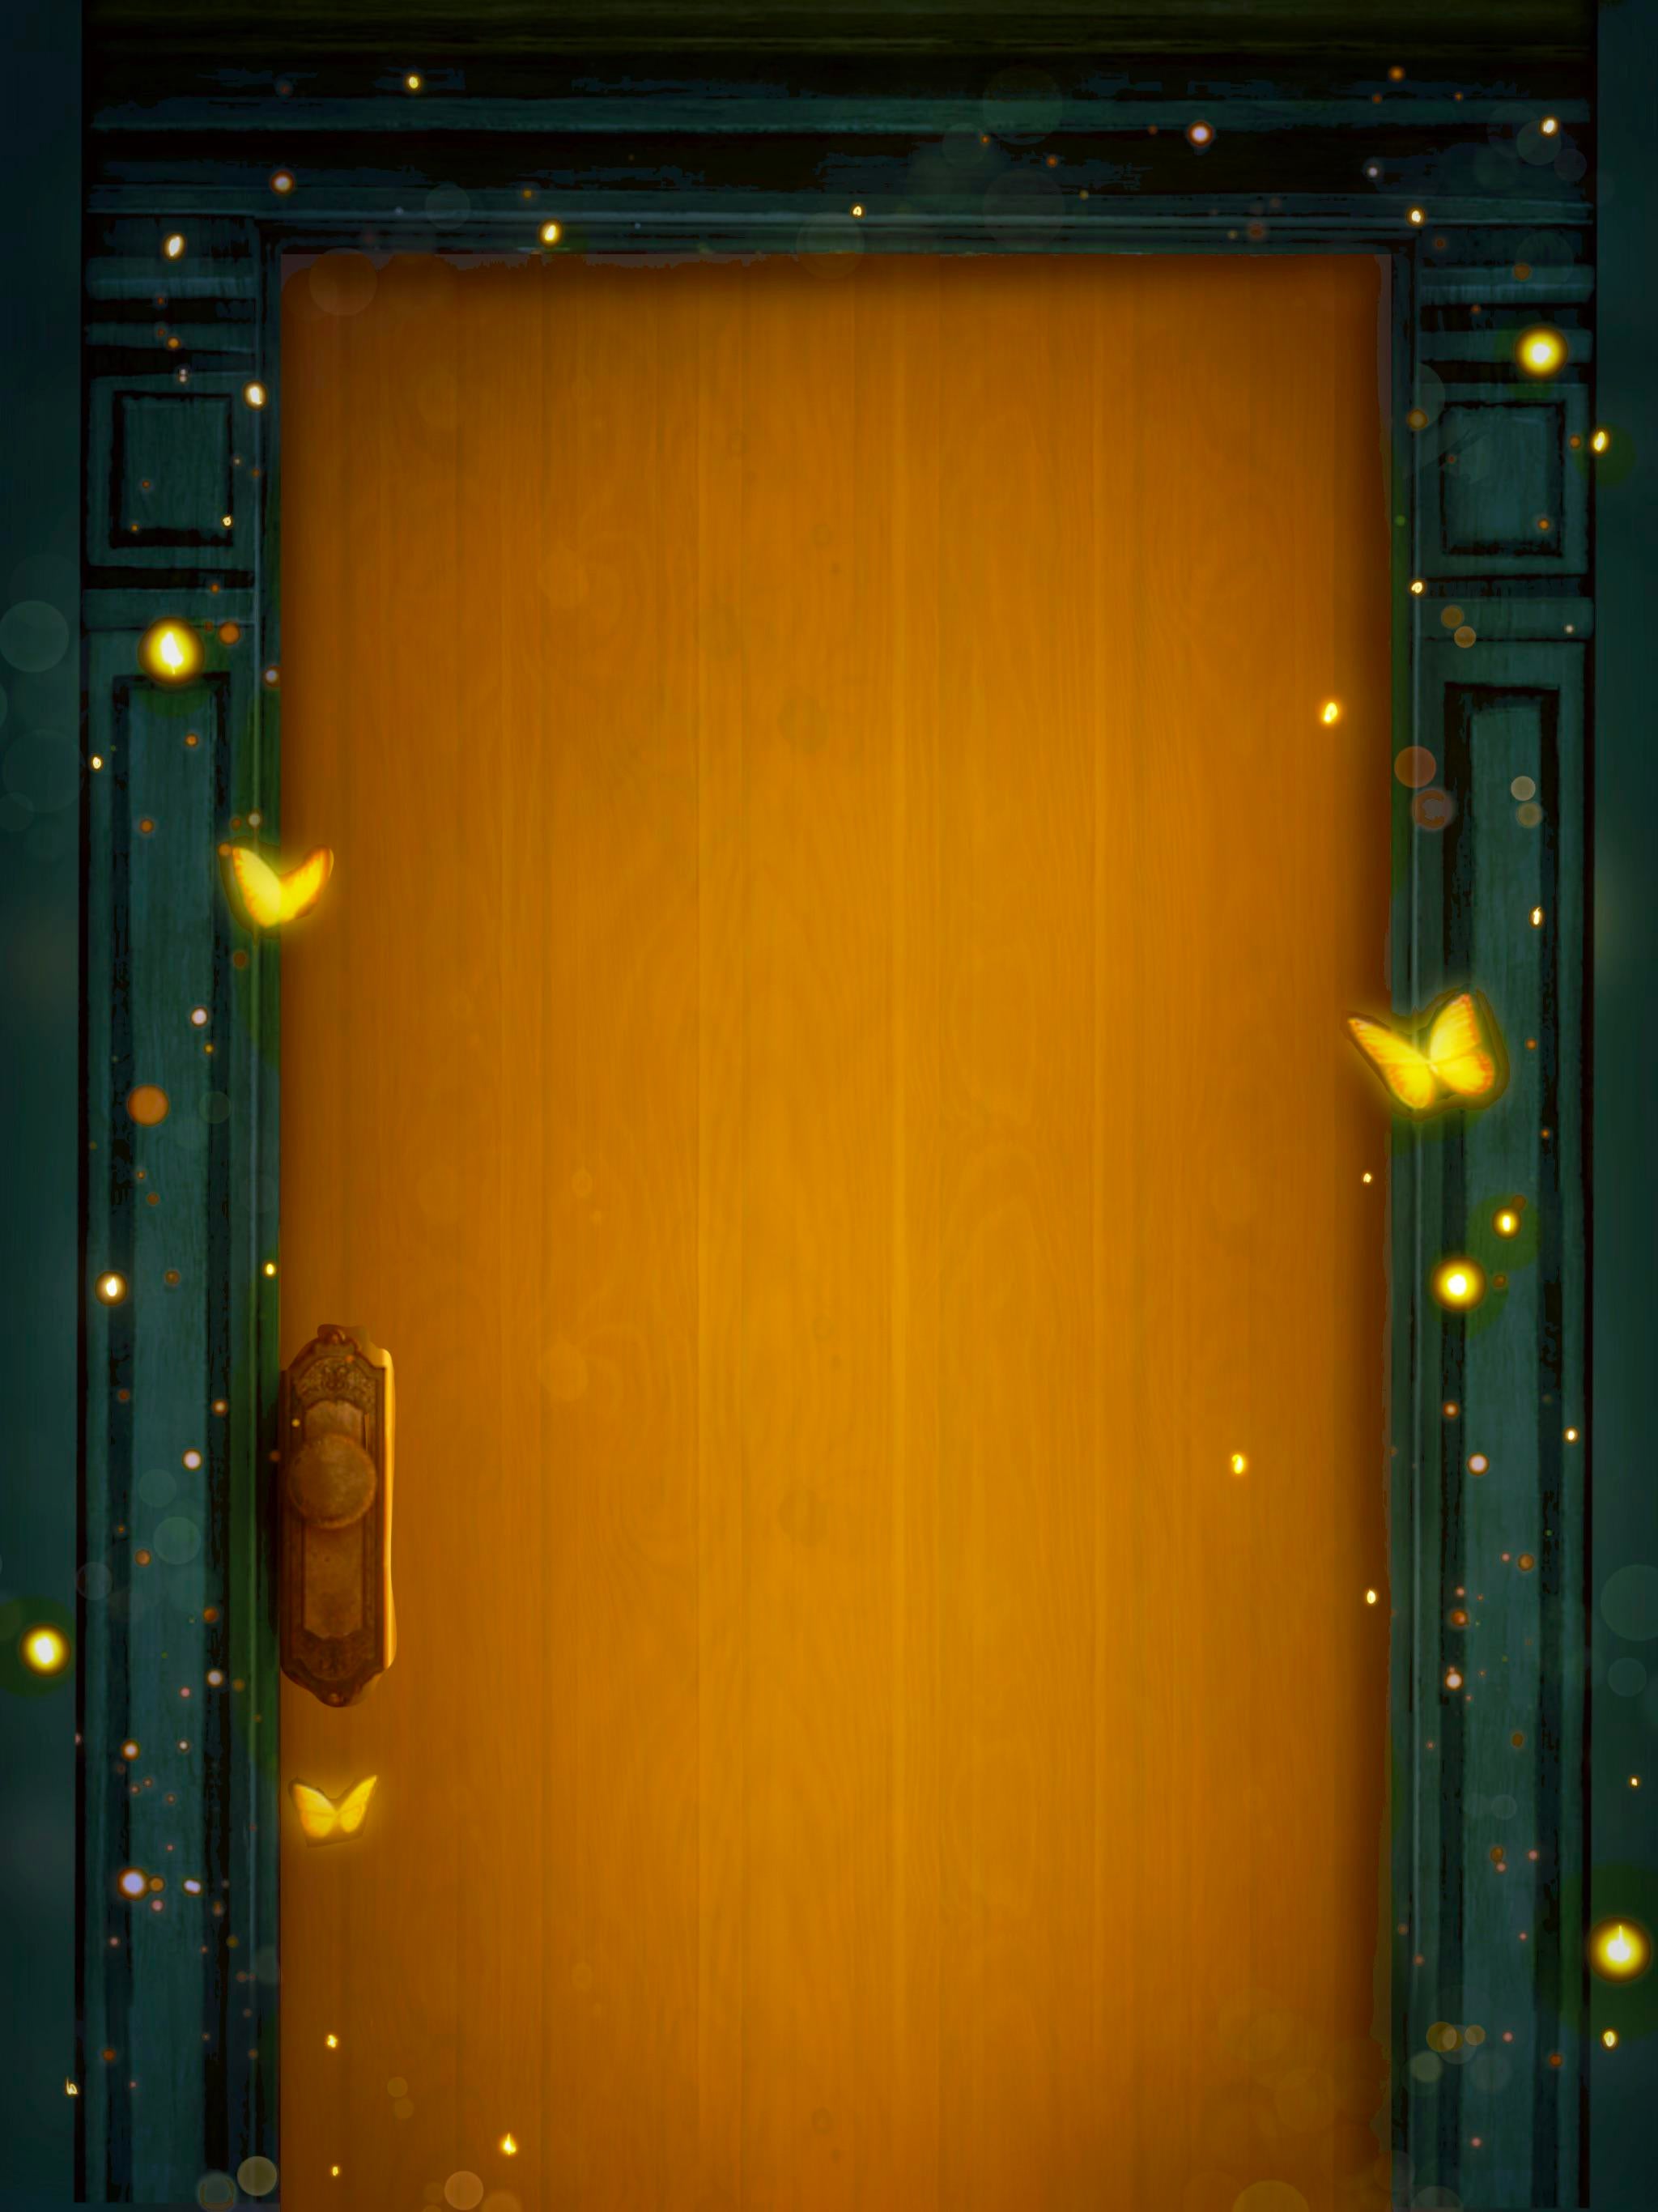 I made an Encanto door for you to use! :)